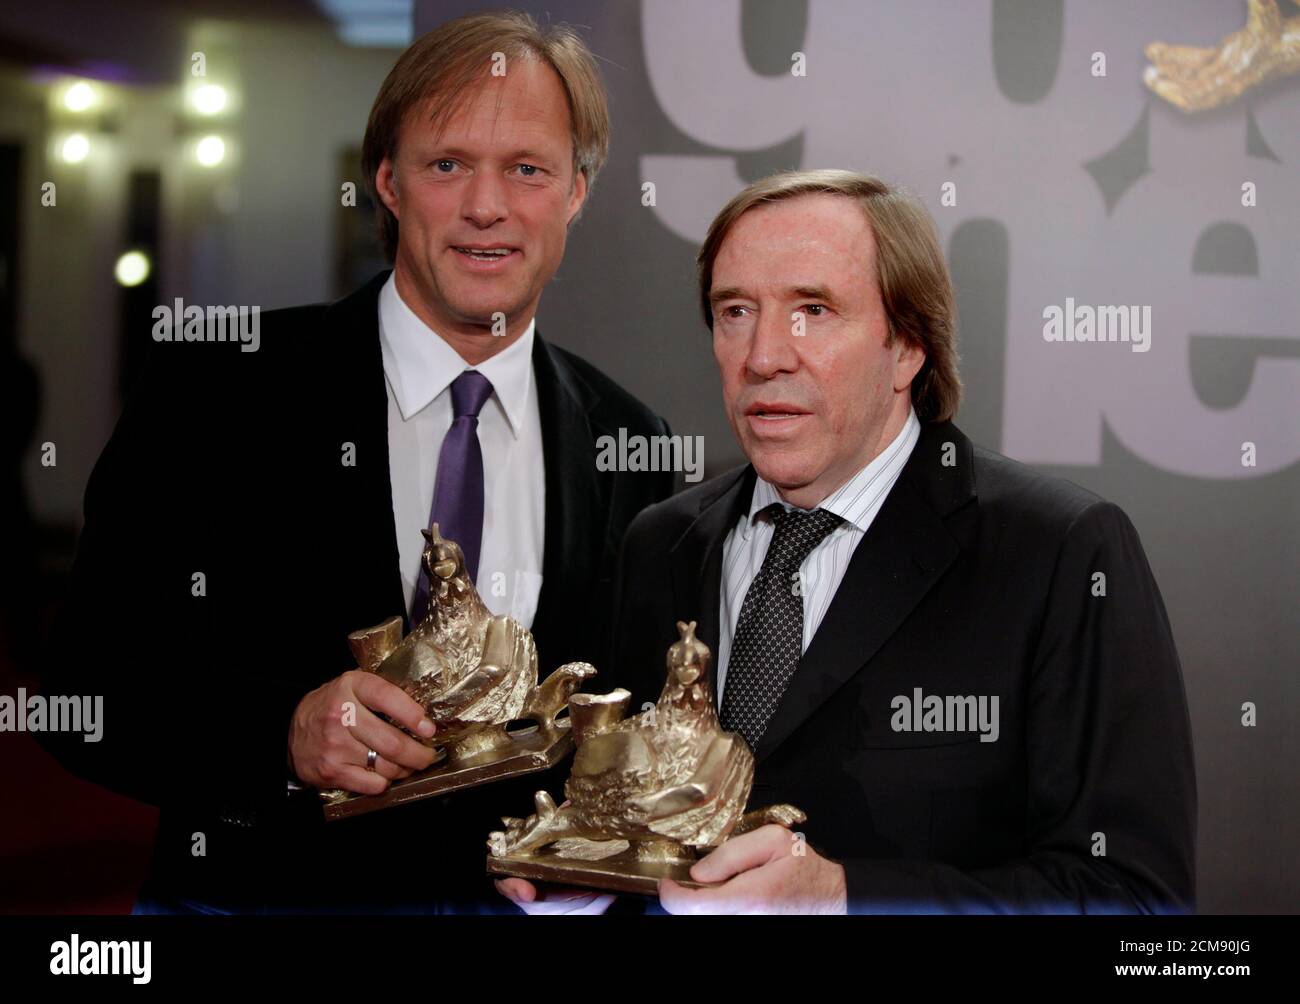 TV sport anchormen Gerhard Delling (L) and former German soccer star  Guenther Netzer arrive as guests in the annual television show 'Menschen  2010' in Munich December 10, 2010. German TV host Thomas